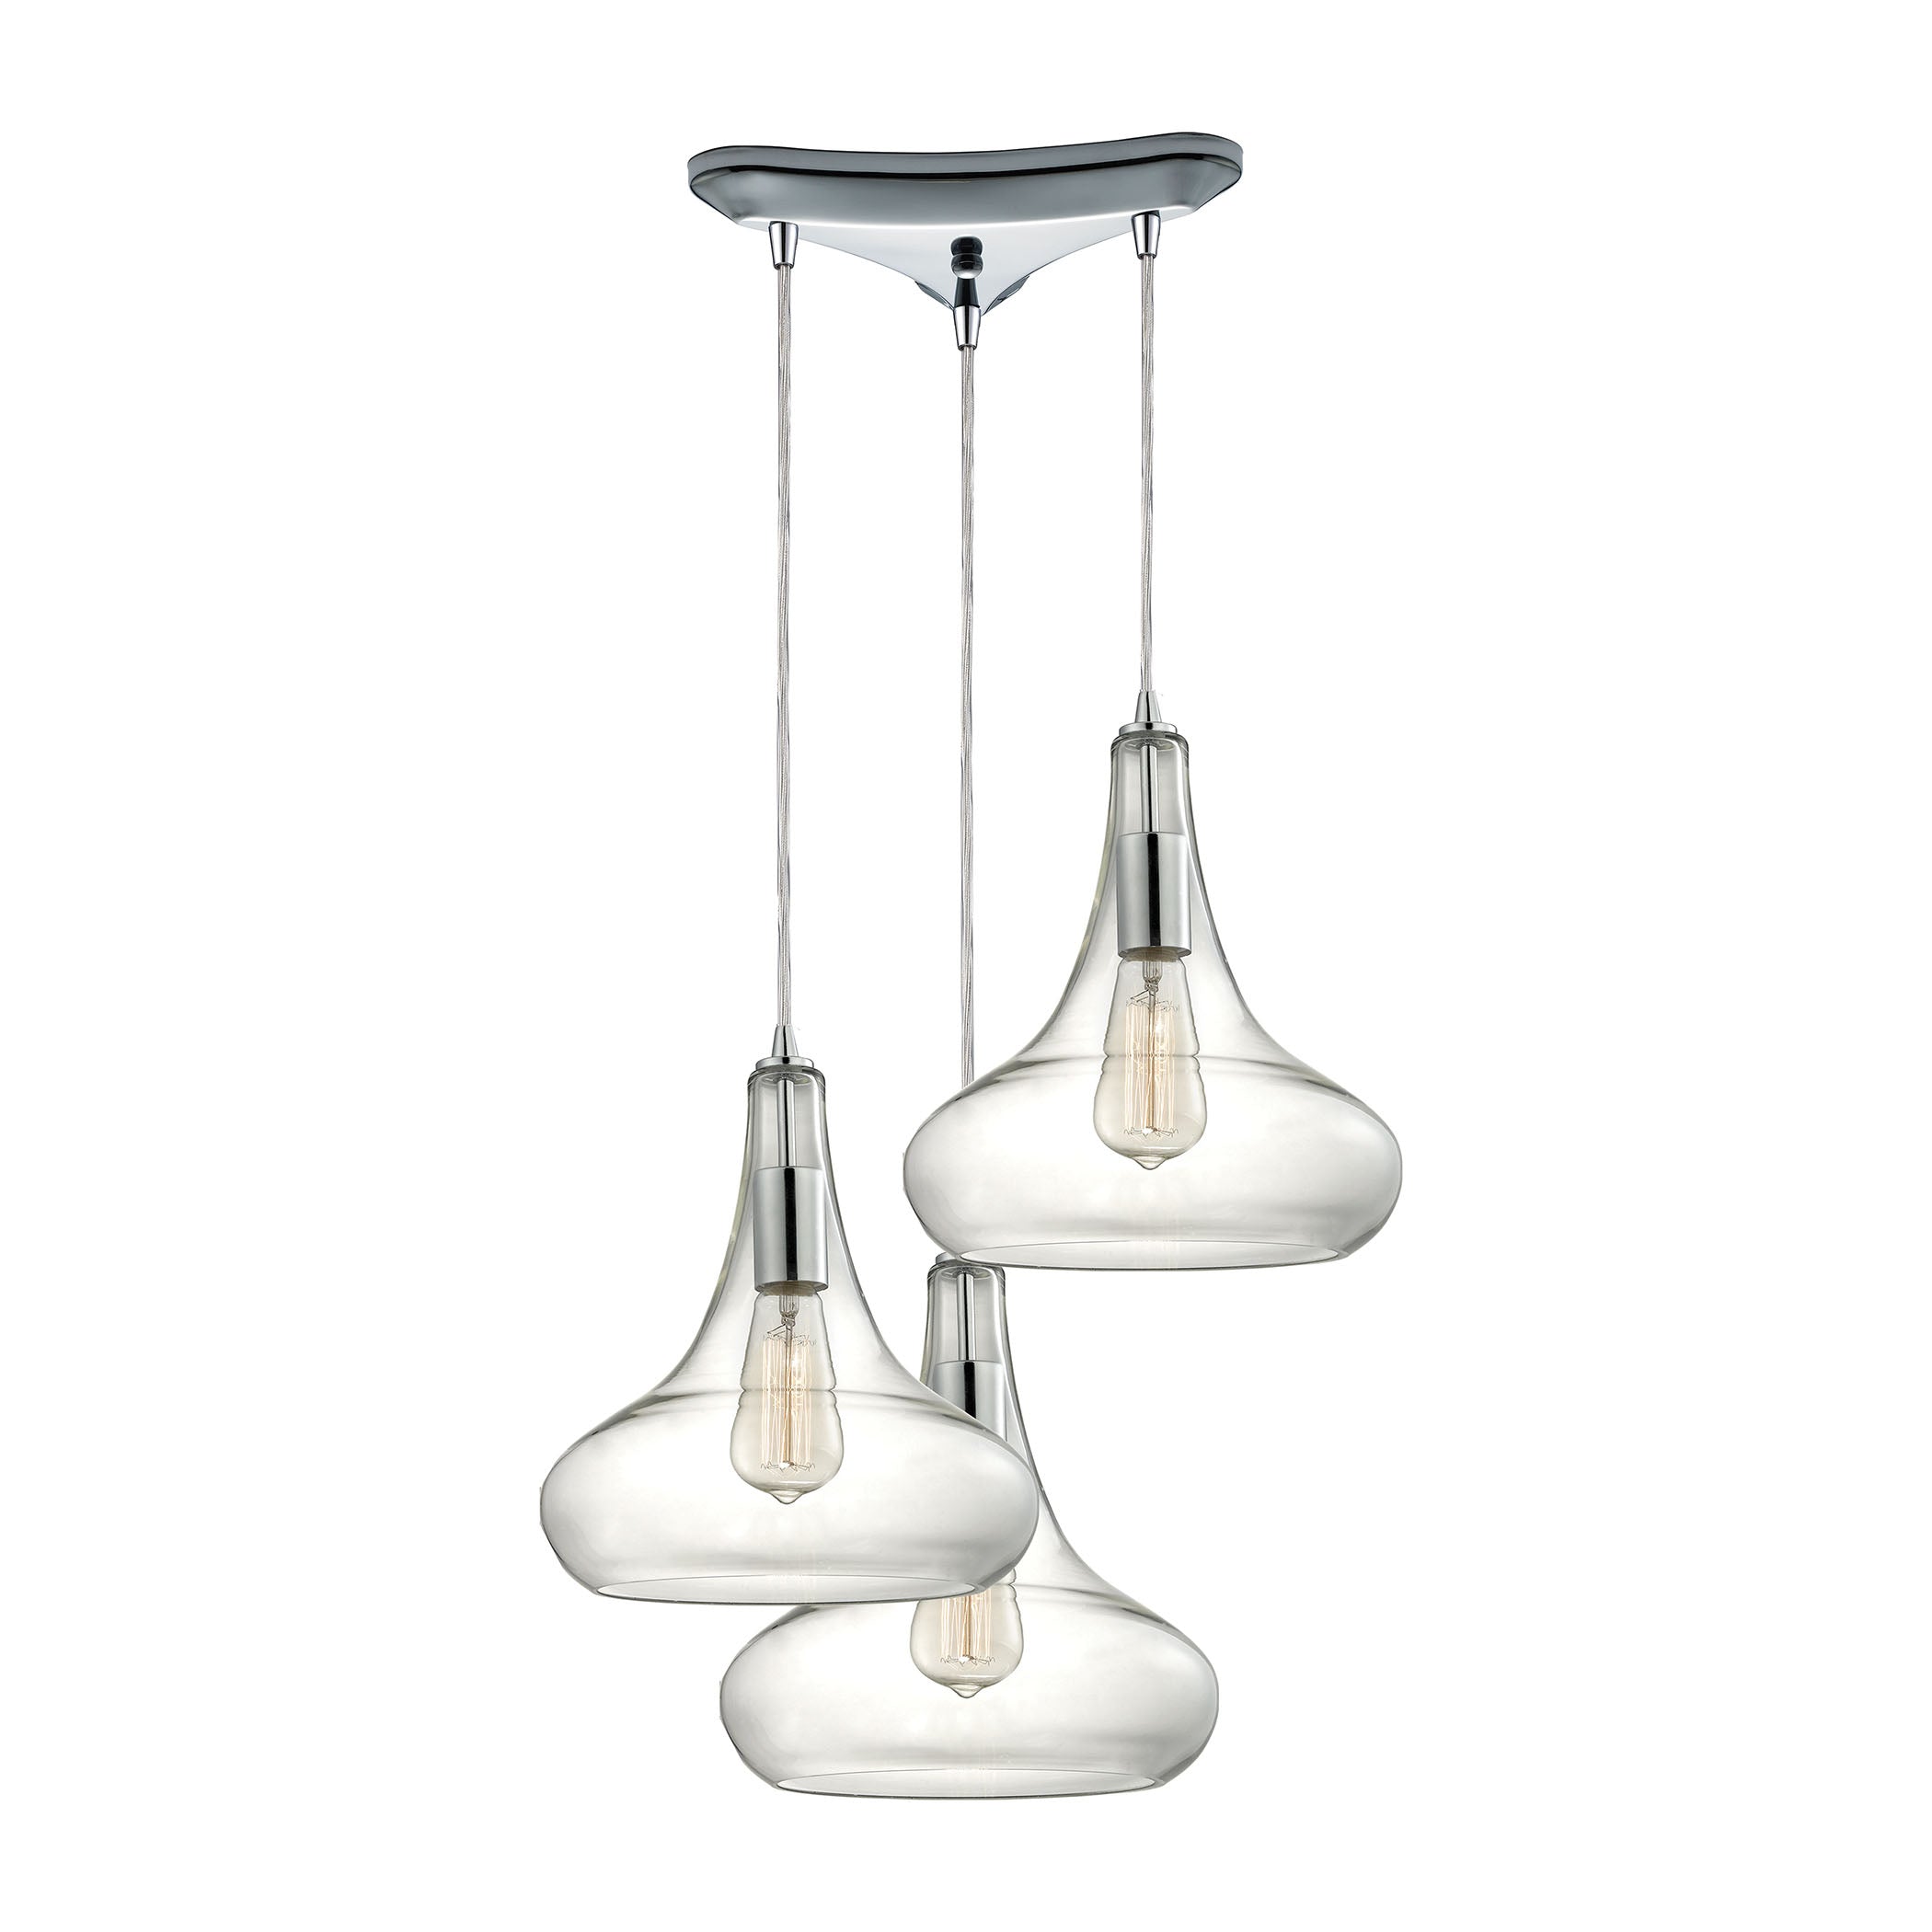 ELK Lighting 10422/3 Orbital 3-Light Triangular Pendant Fixture in Polished Chrome with Clear Glass